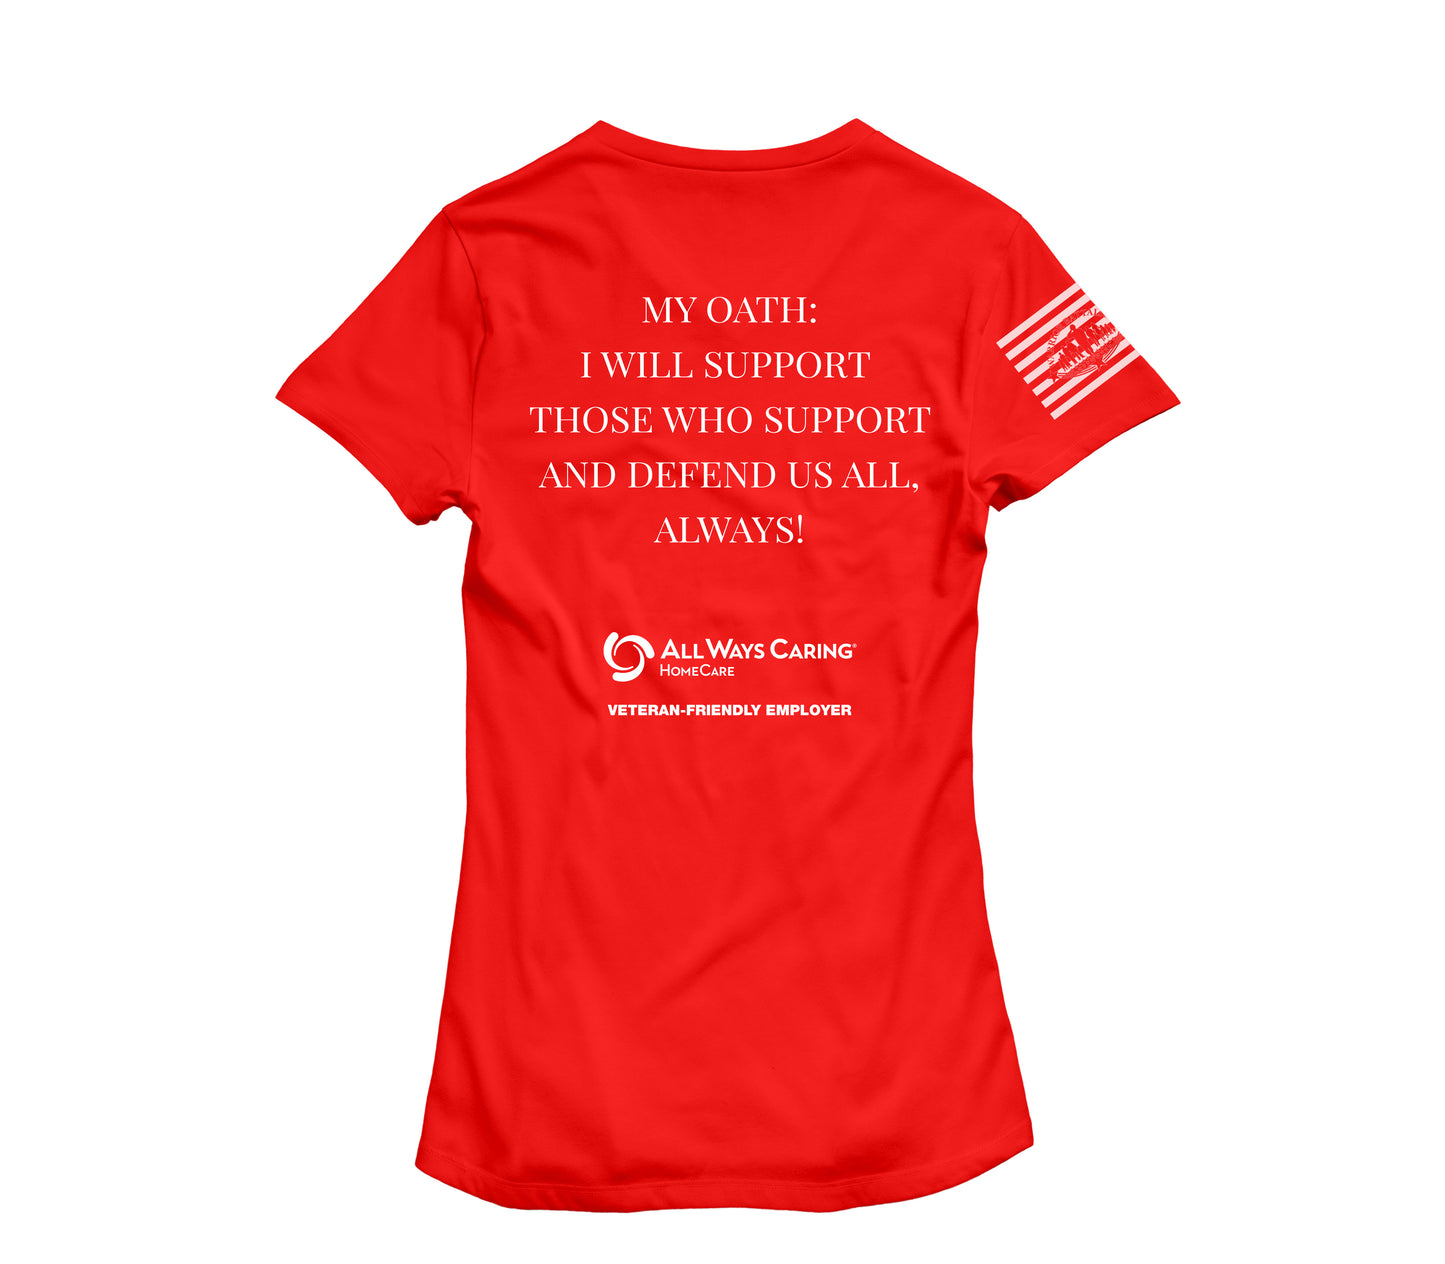 All Ways Caring Team - My Oath Neutral Short Sleeve V-Neck - RED - White Print